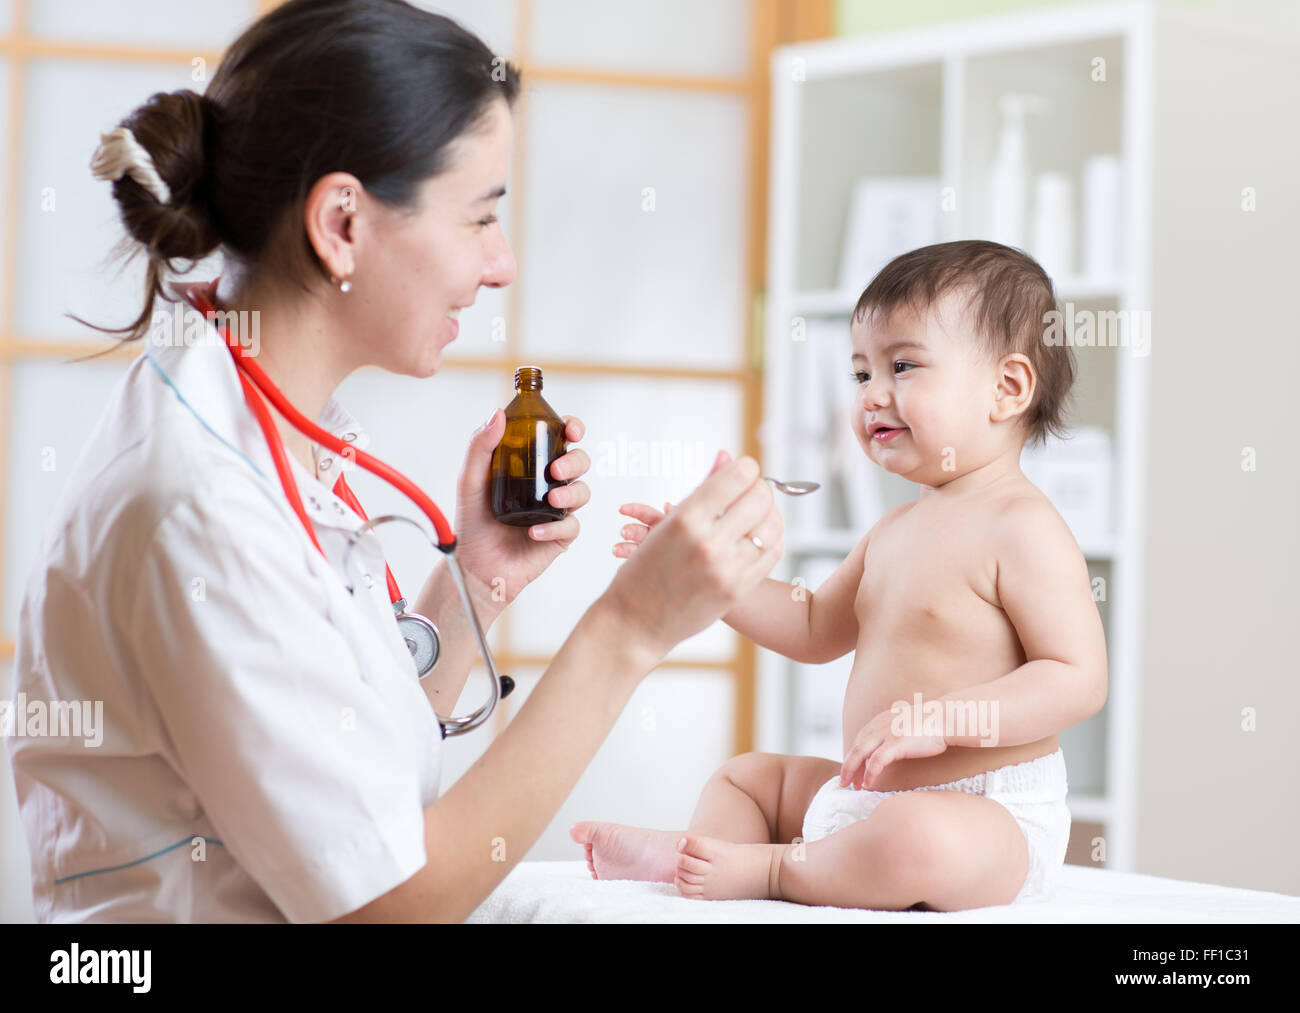 doctor giving medicament to kid with a spoon, hospital Stock Photo